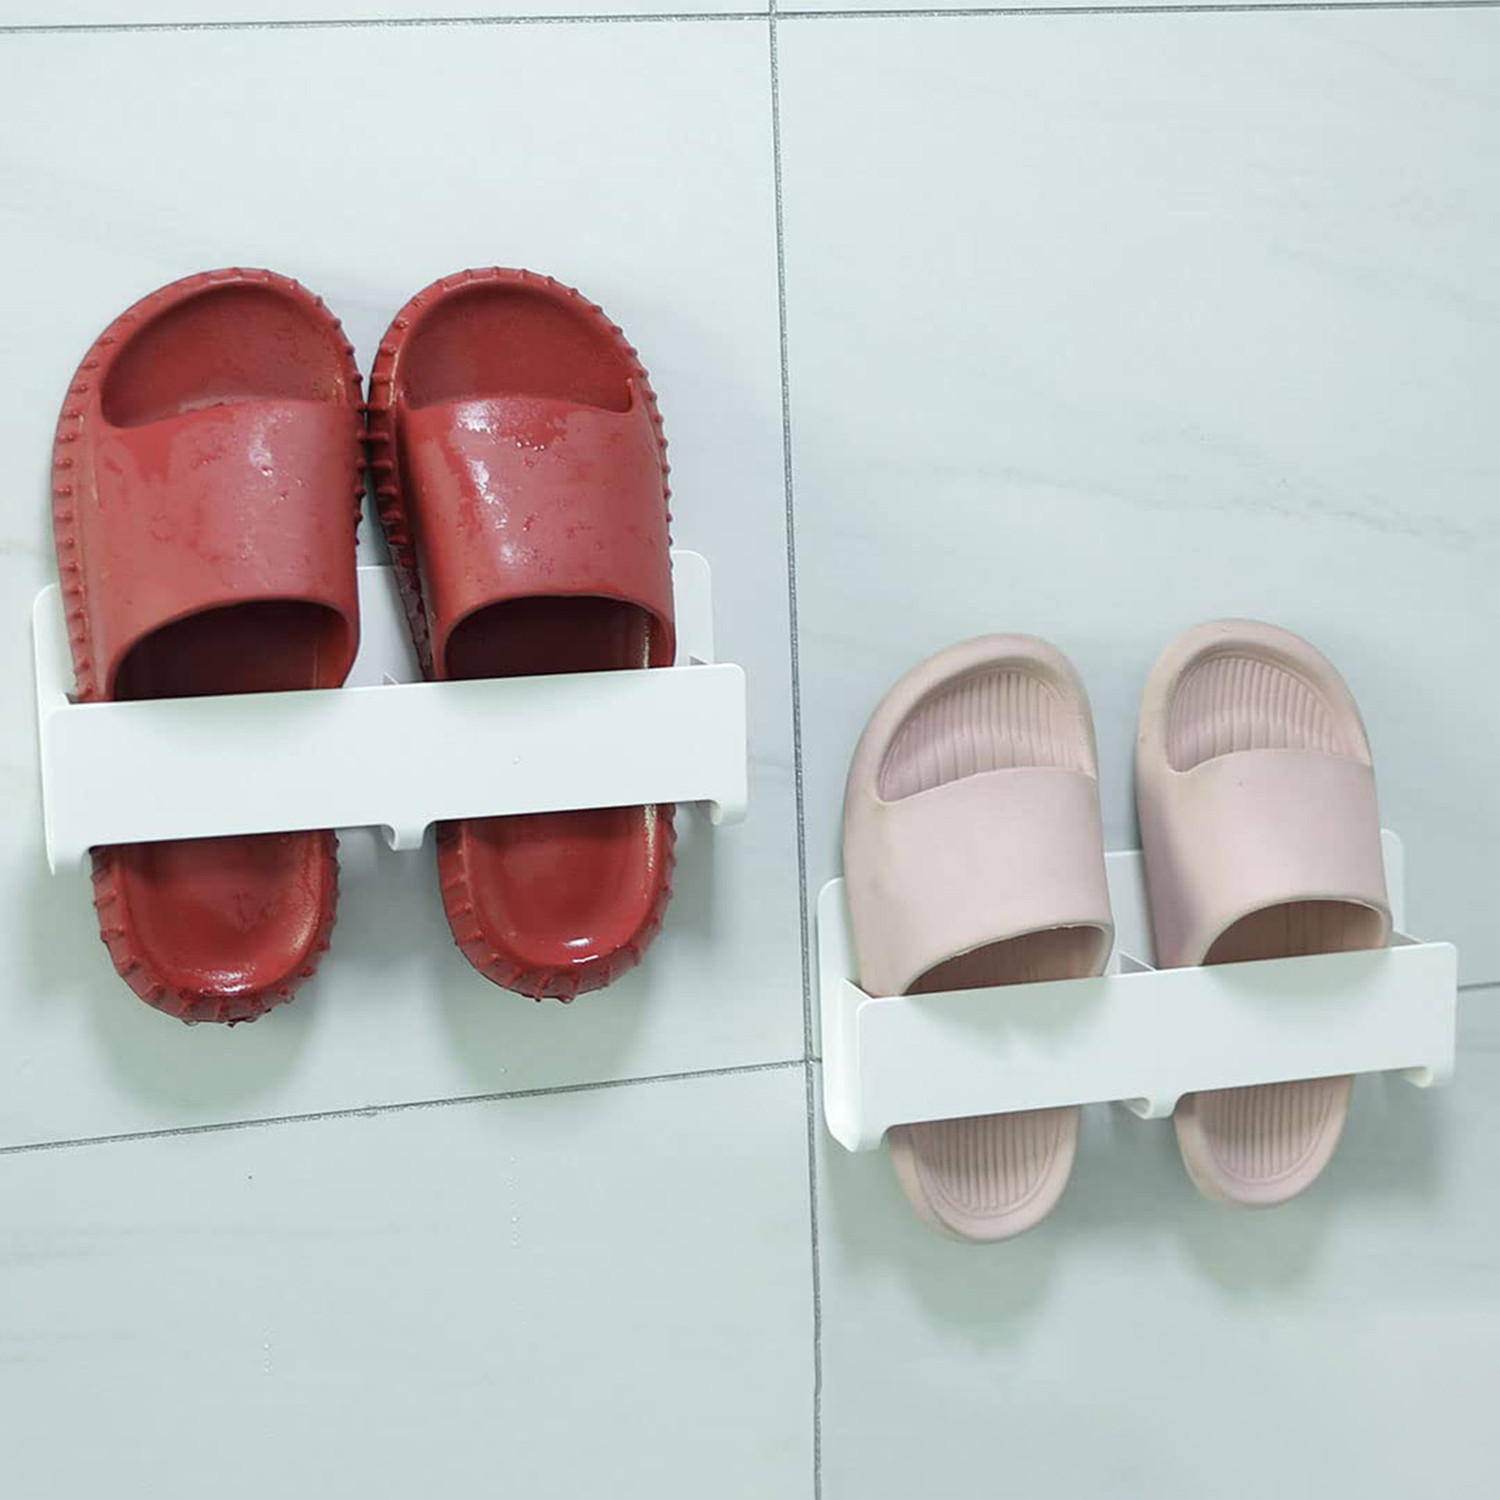 Kuber Industries Wall Mounted Shoe Rack for Home | ABS/PVC | Compact & Durable | Self-Adhesive & DIY | Unique Design | Shoe Stand For Bathroom & Bedroom | Pack of 2 | White